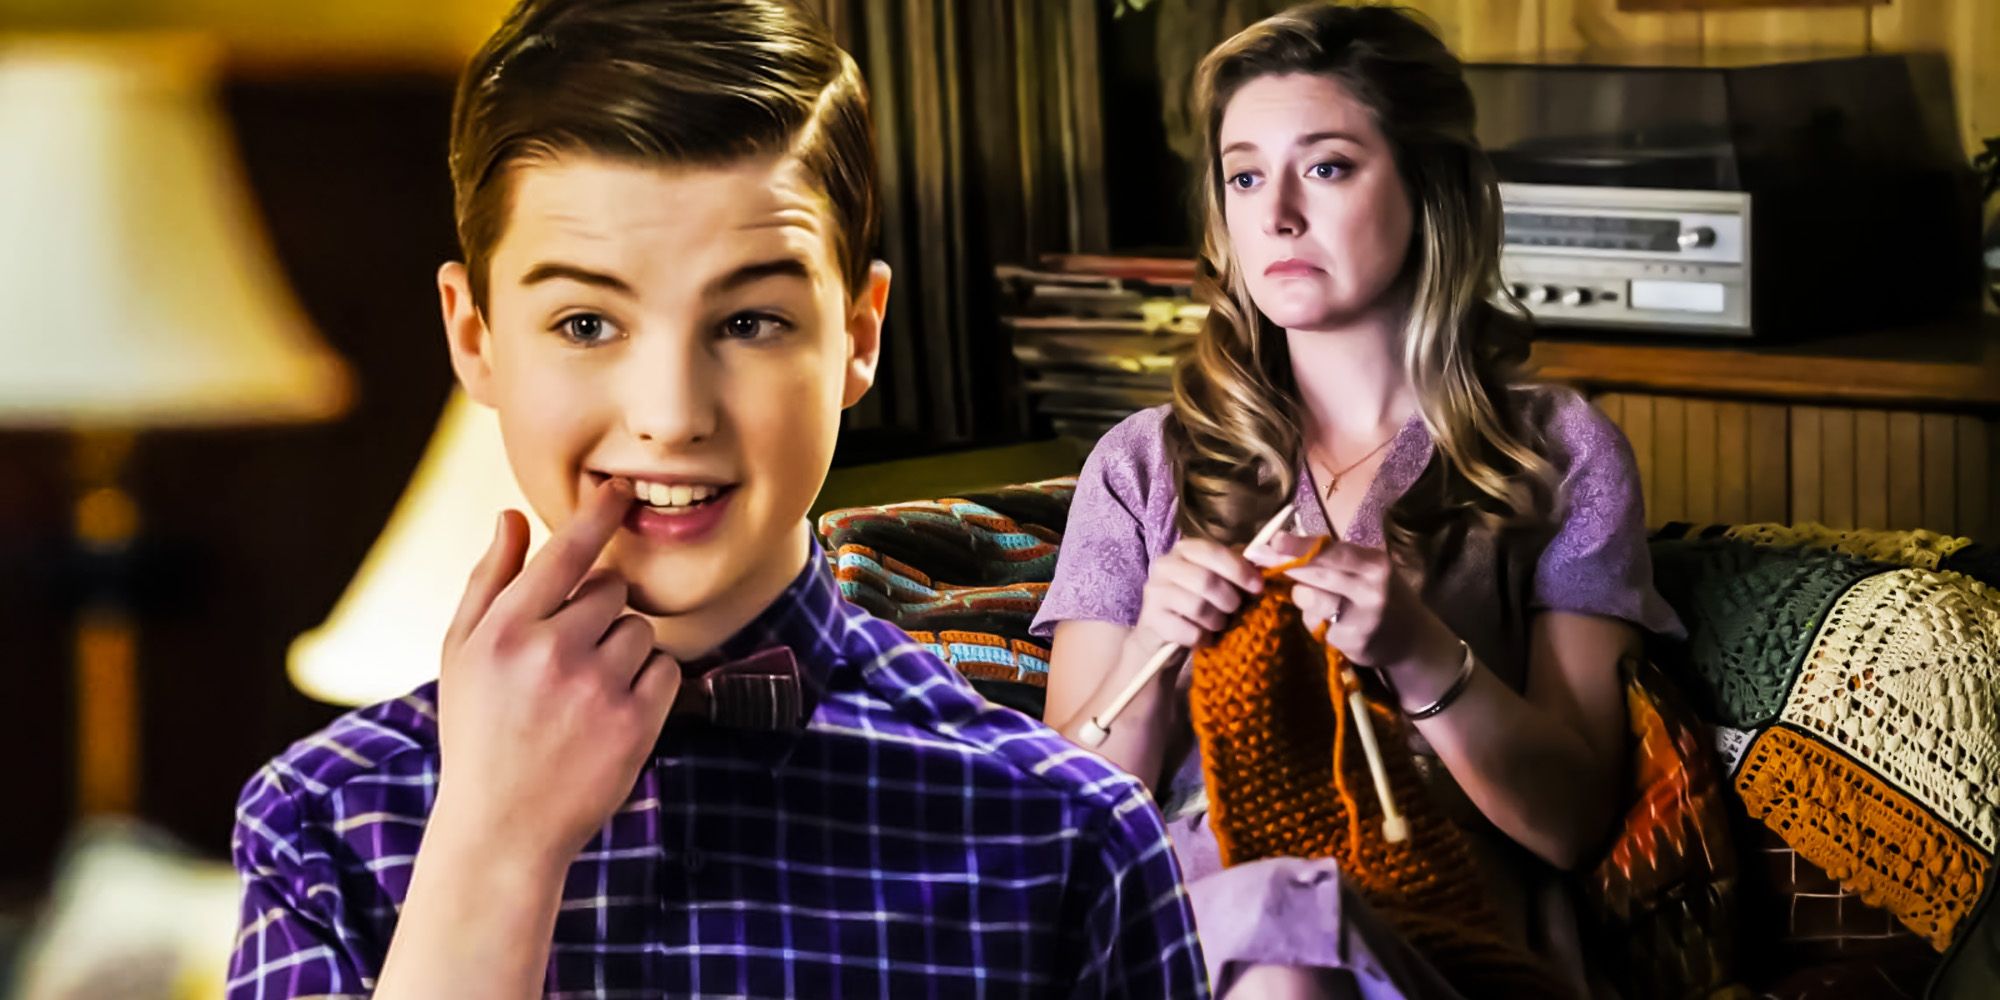 Young sheldon Mary has become the villain